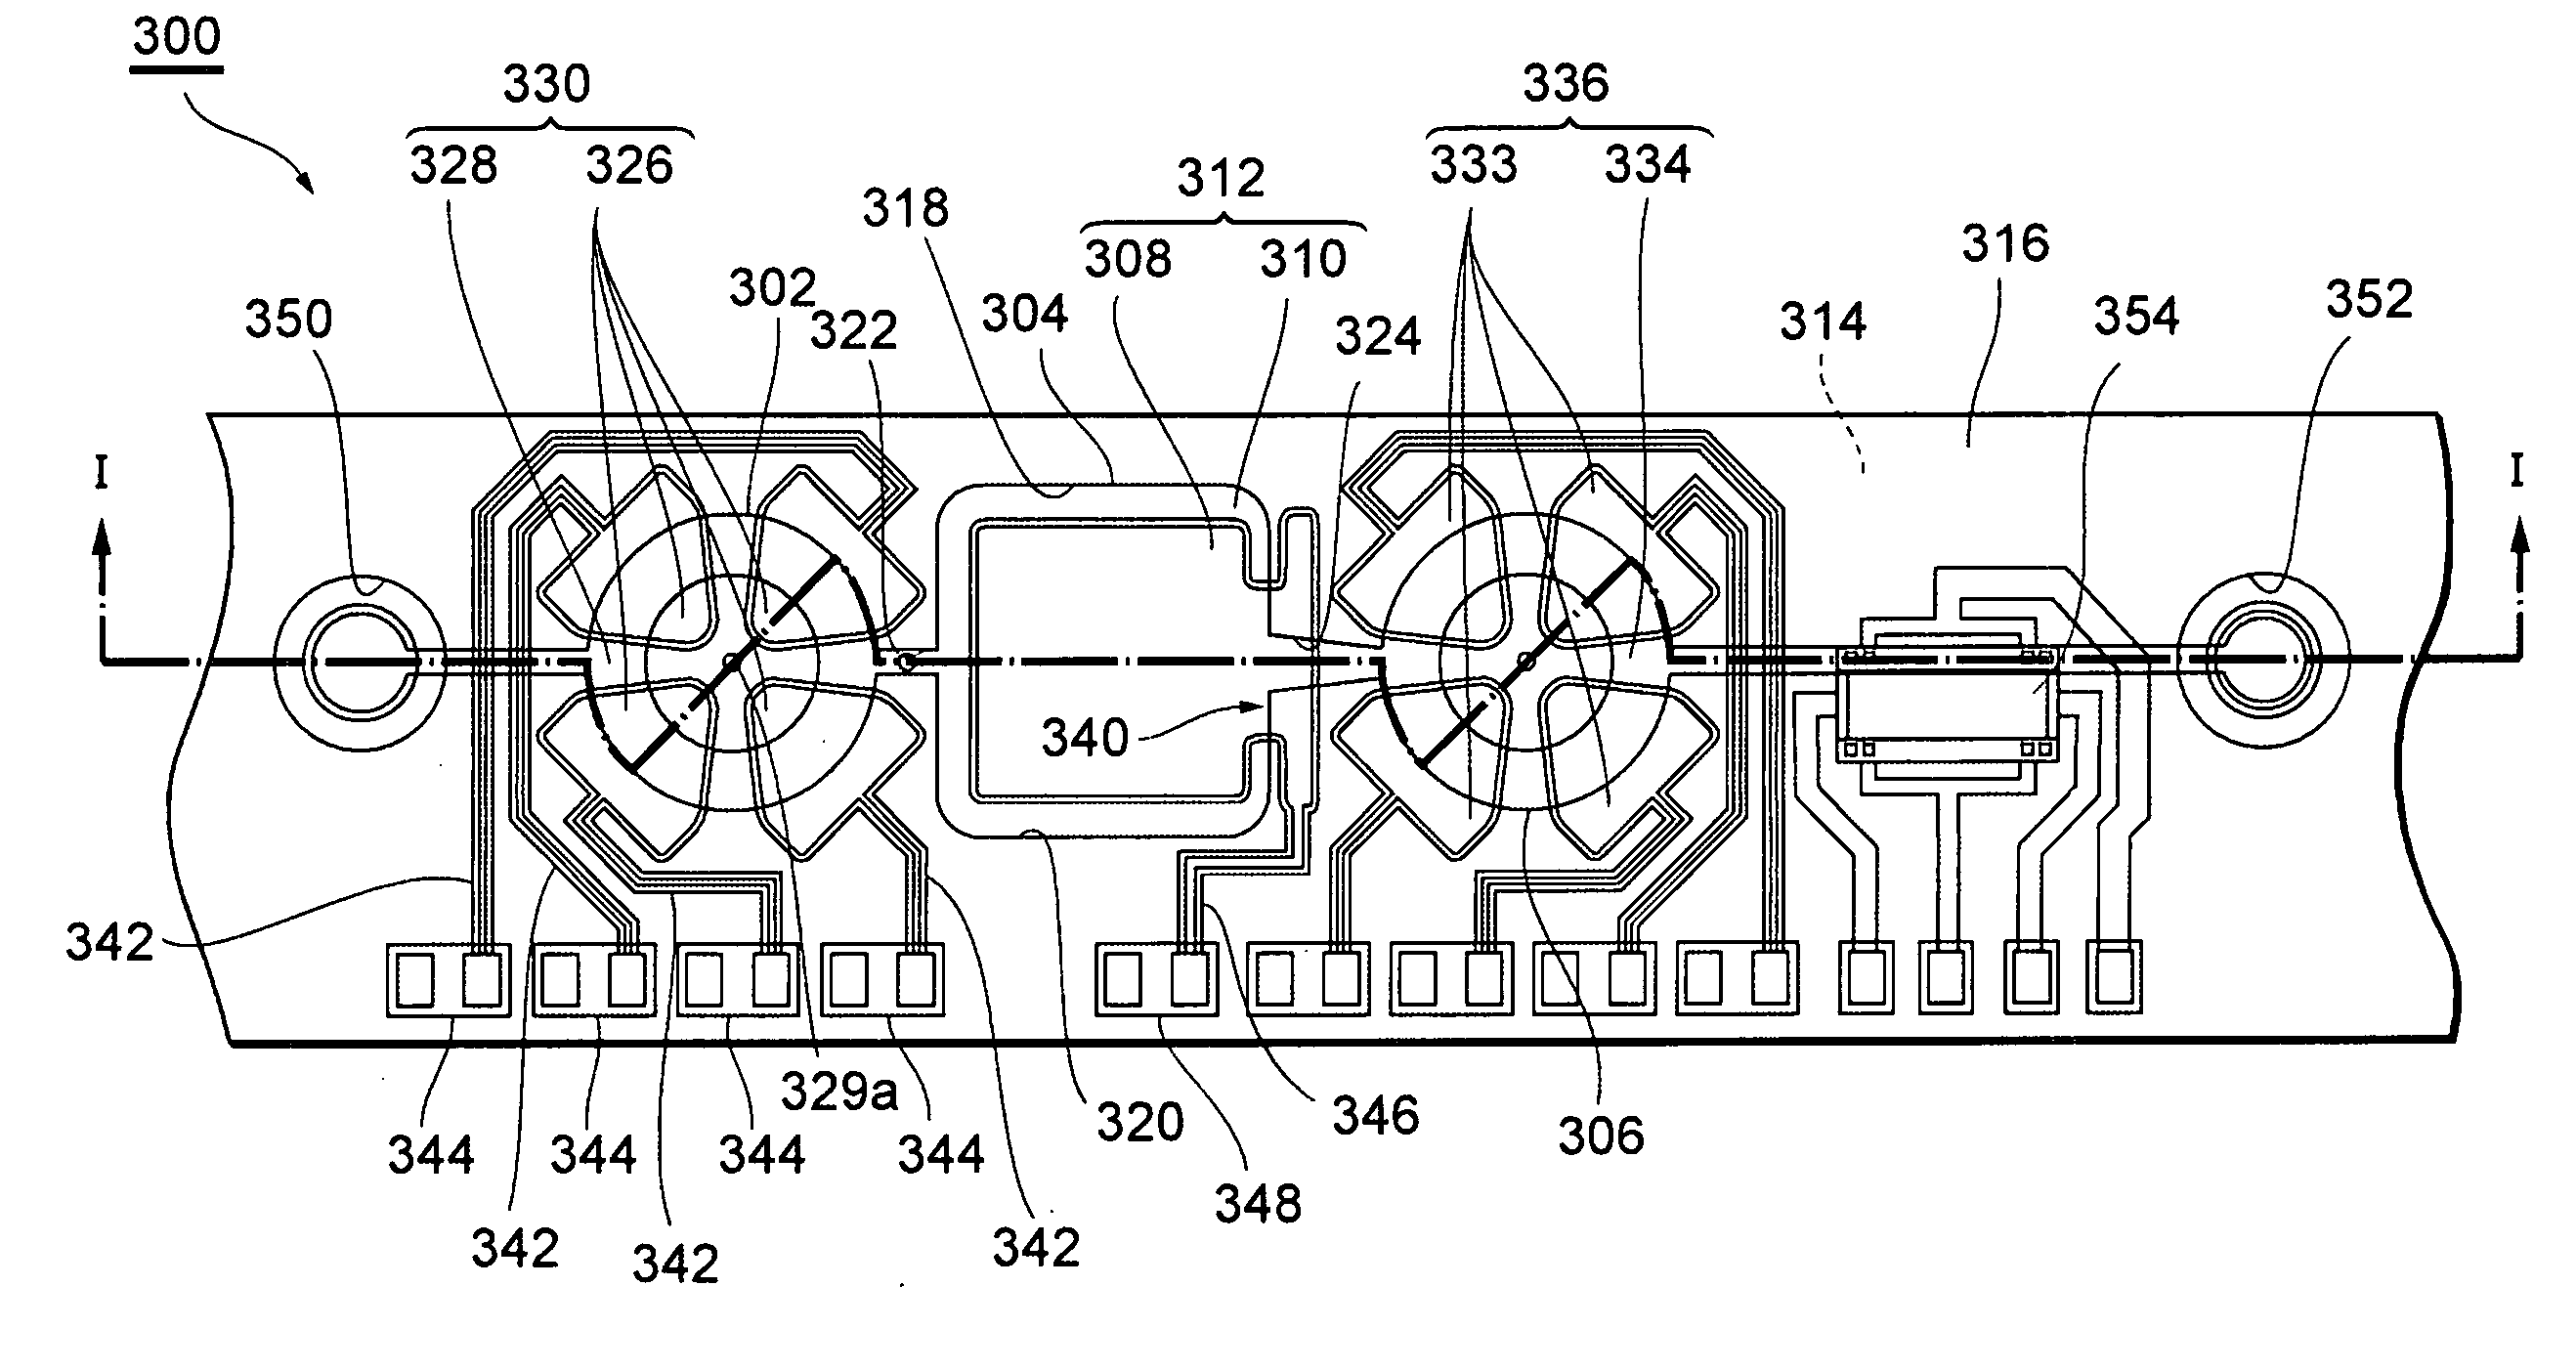 Piezoelectric pump and fluid transferring system